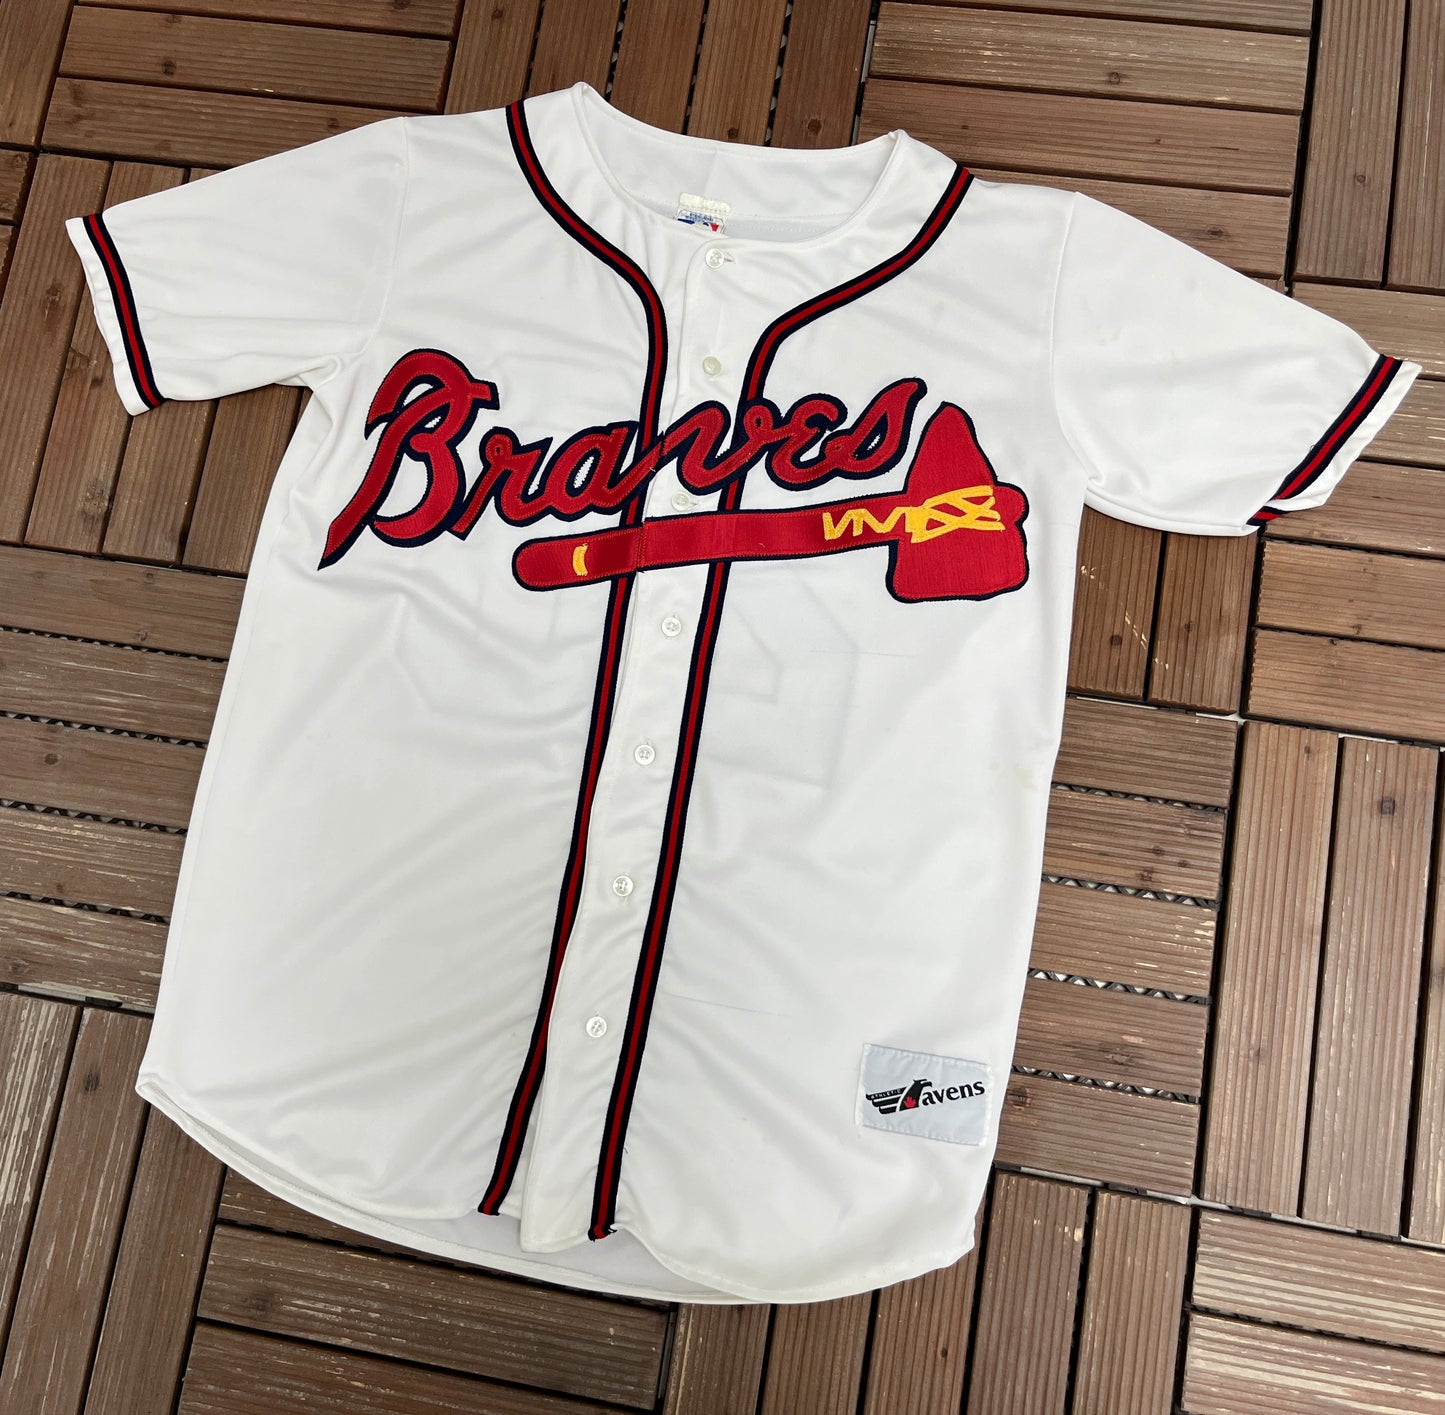 New Stitches Official MLB Atlanta Braves Pull Over XL Jersey